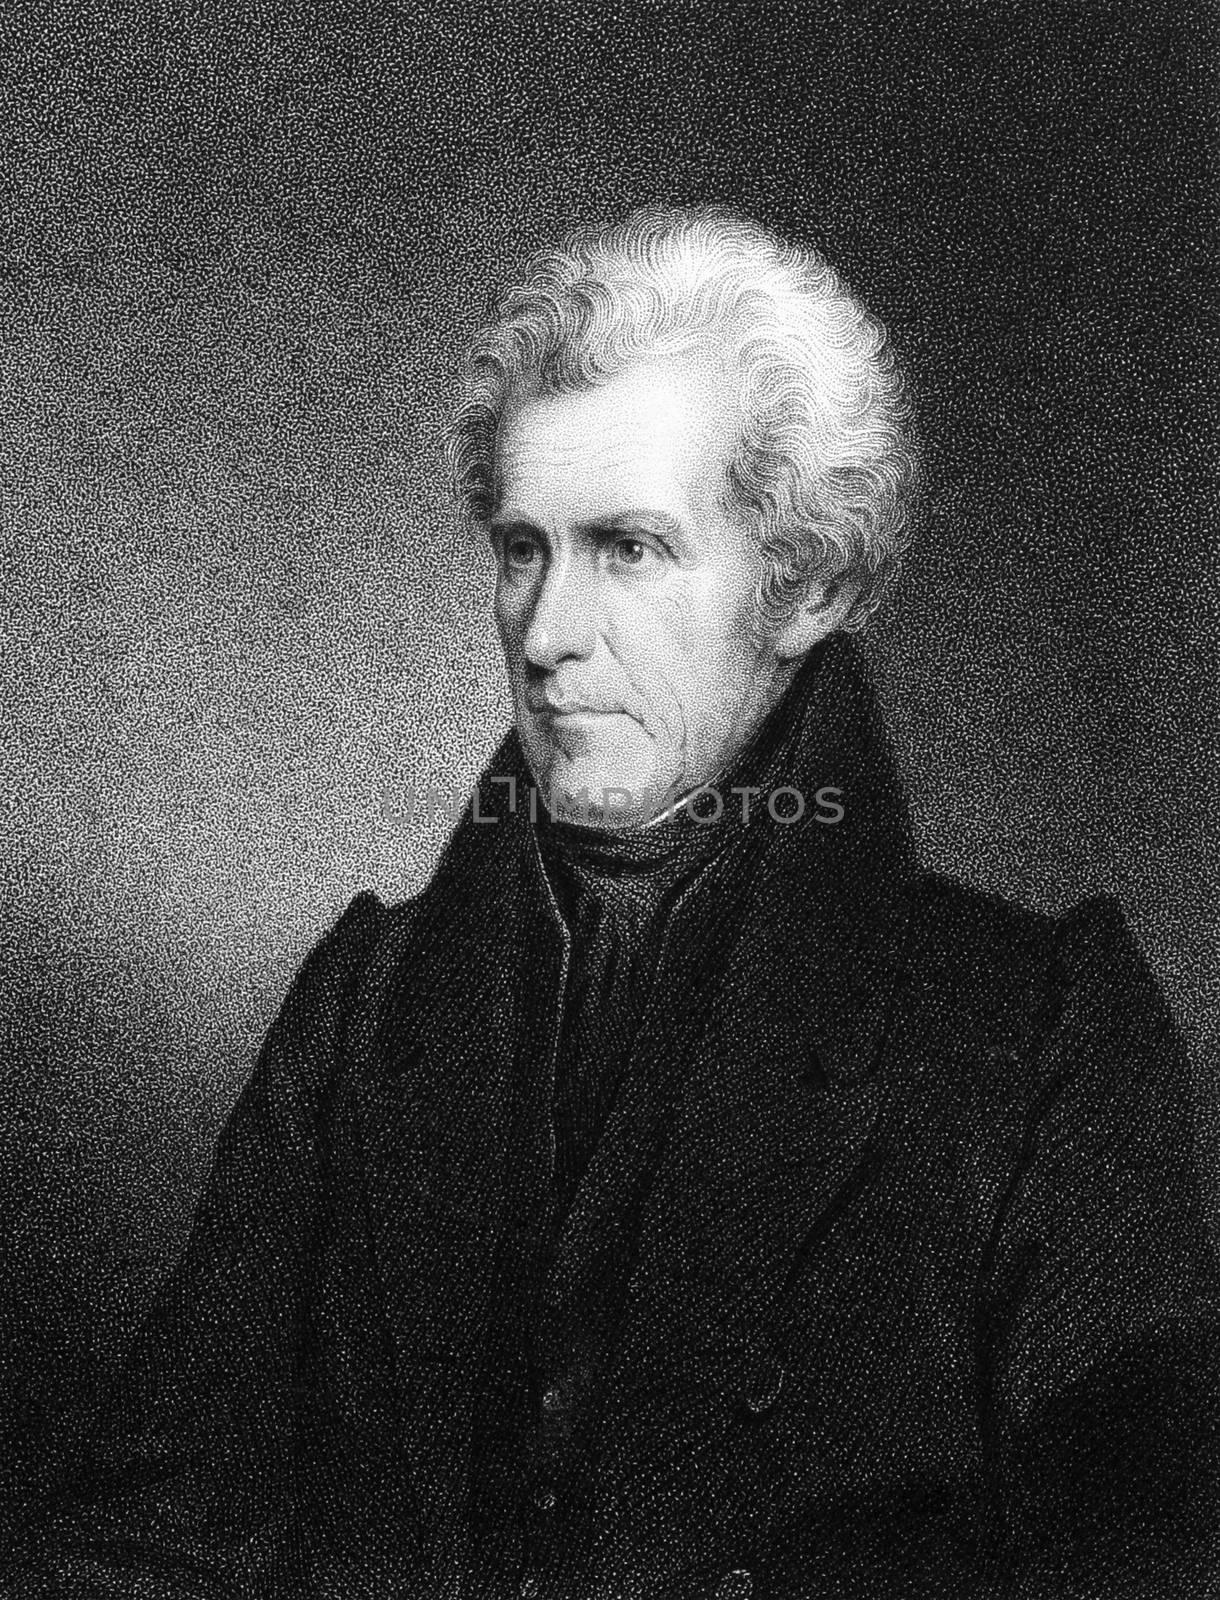 Andrew Jackson (1767-1845) on engraving from 1834. 7th President of the United States during 1829-1837. Engraved by J.B Longacre and published in ''National Portrait Gallery of Distinguished Americans'',USA,1834.